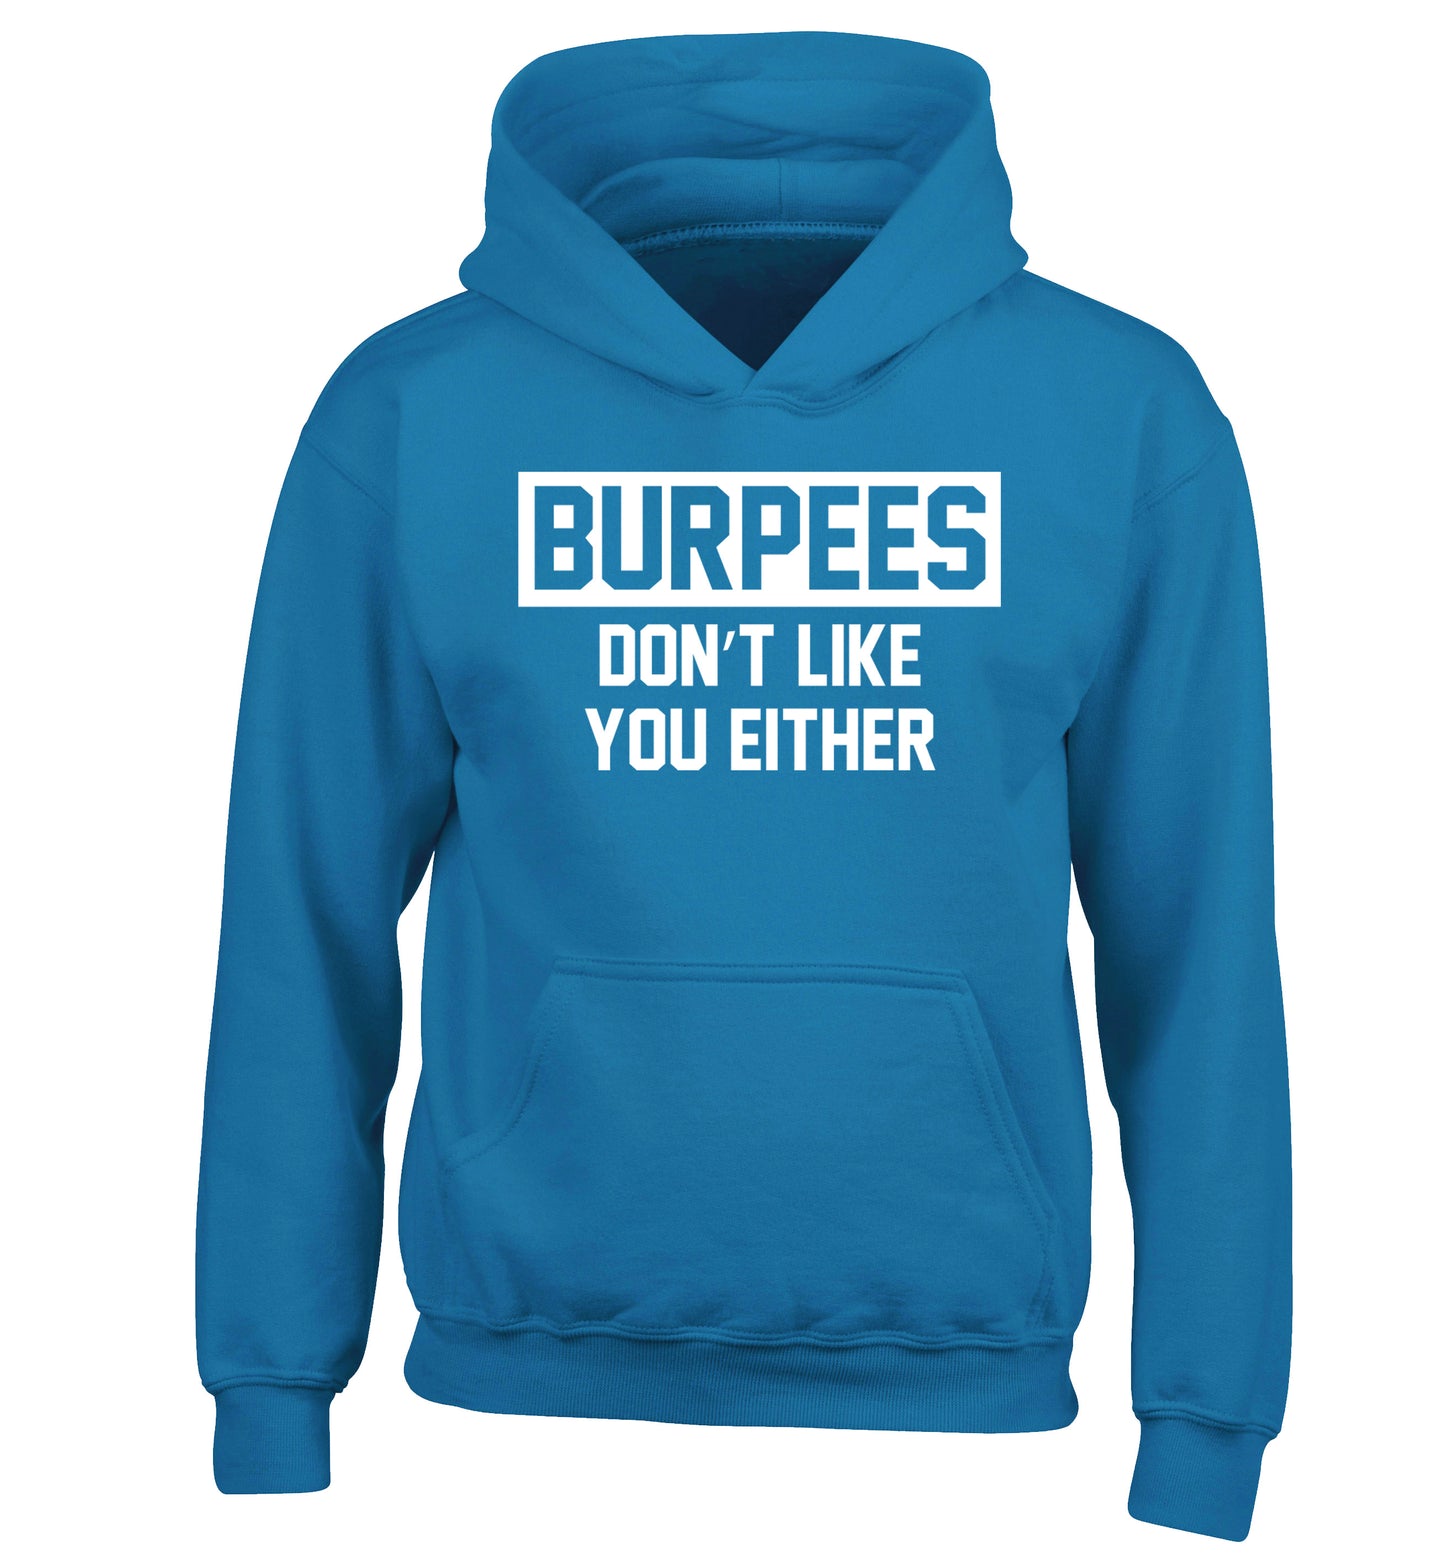 Burpees don't like you either children's blue hoodie 12-14 Years